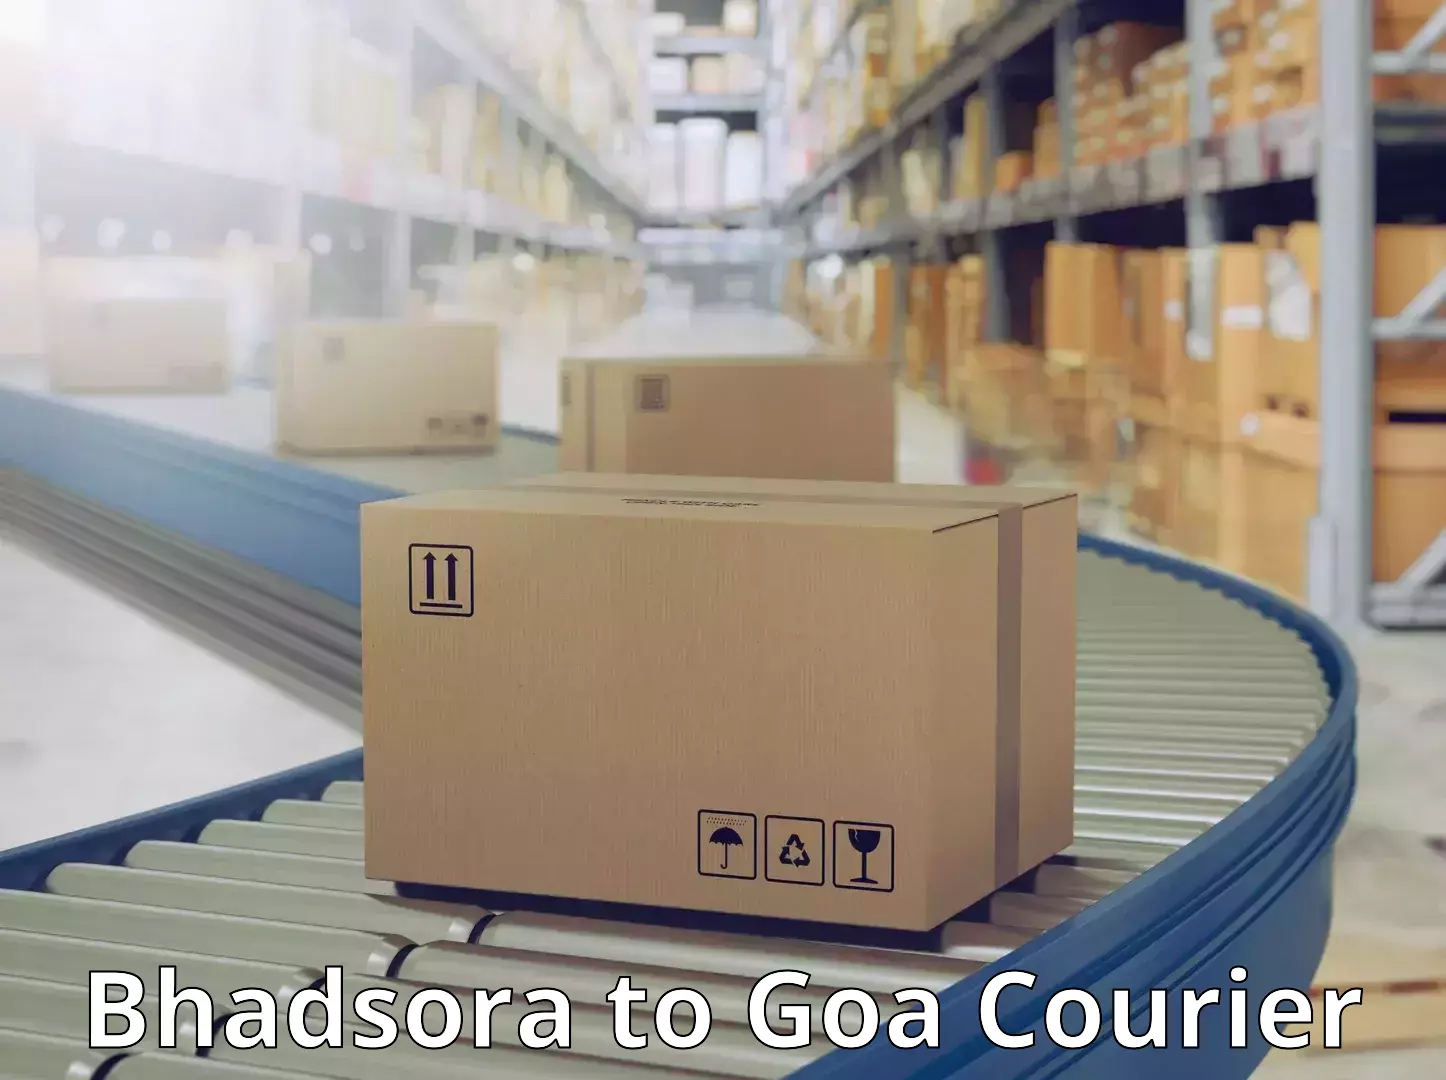 Express delivery network Bhadsora to South Goa